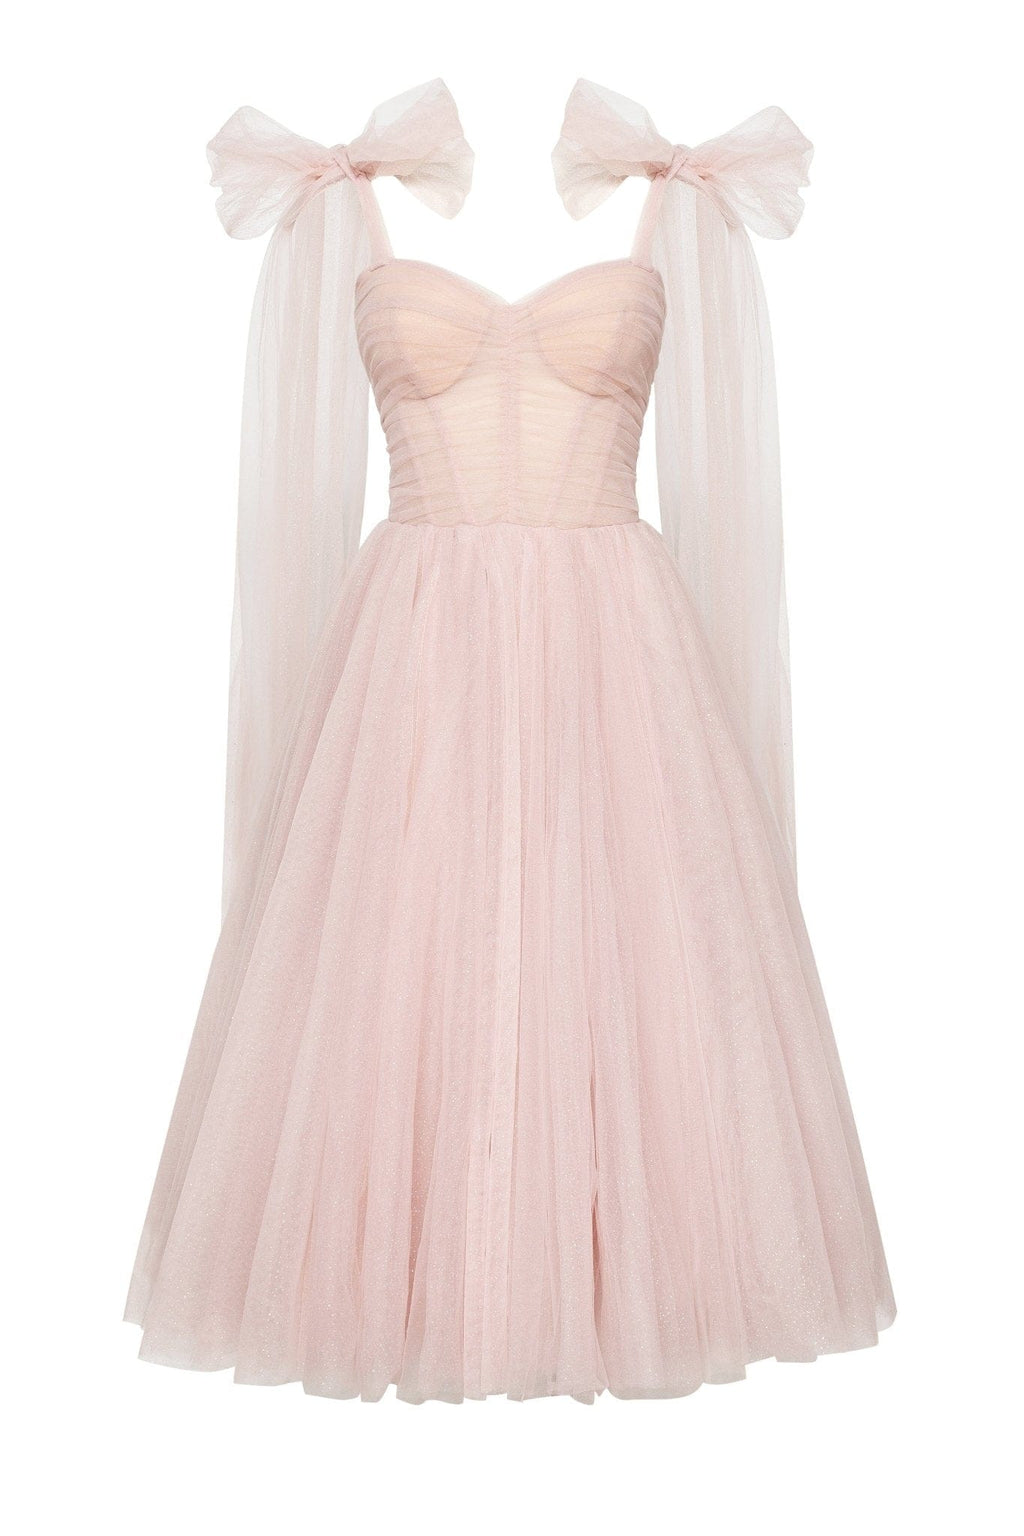 Misty Rose Worldwide USA, - Dress Tulle delivery ➤➤ Dresses Milla Midi Ruffled